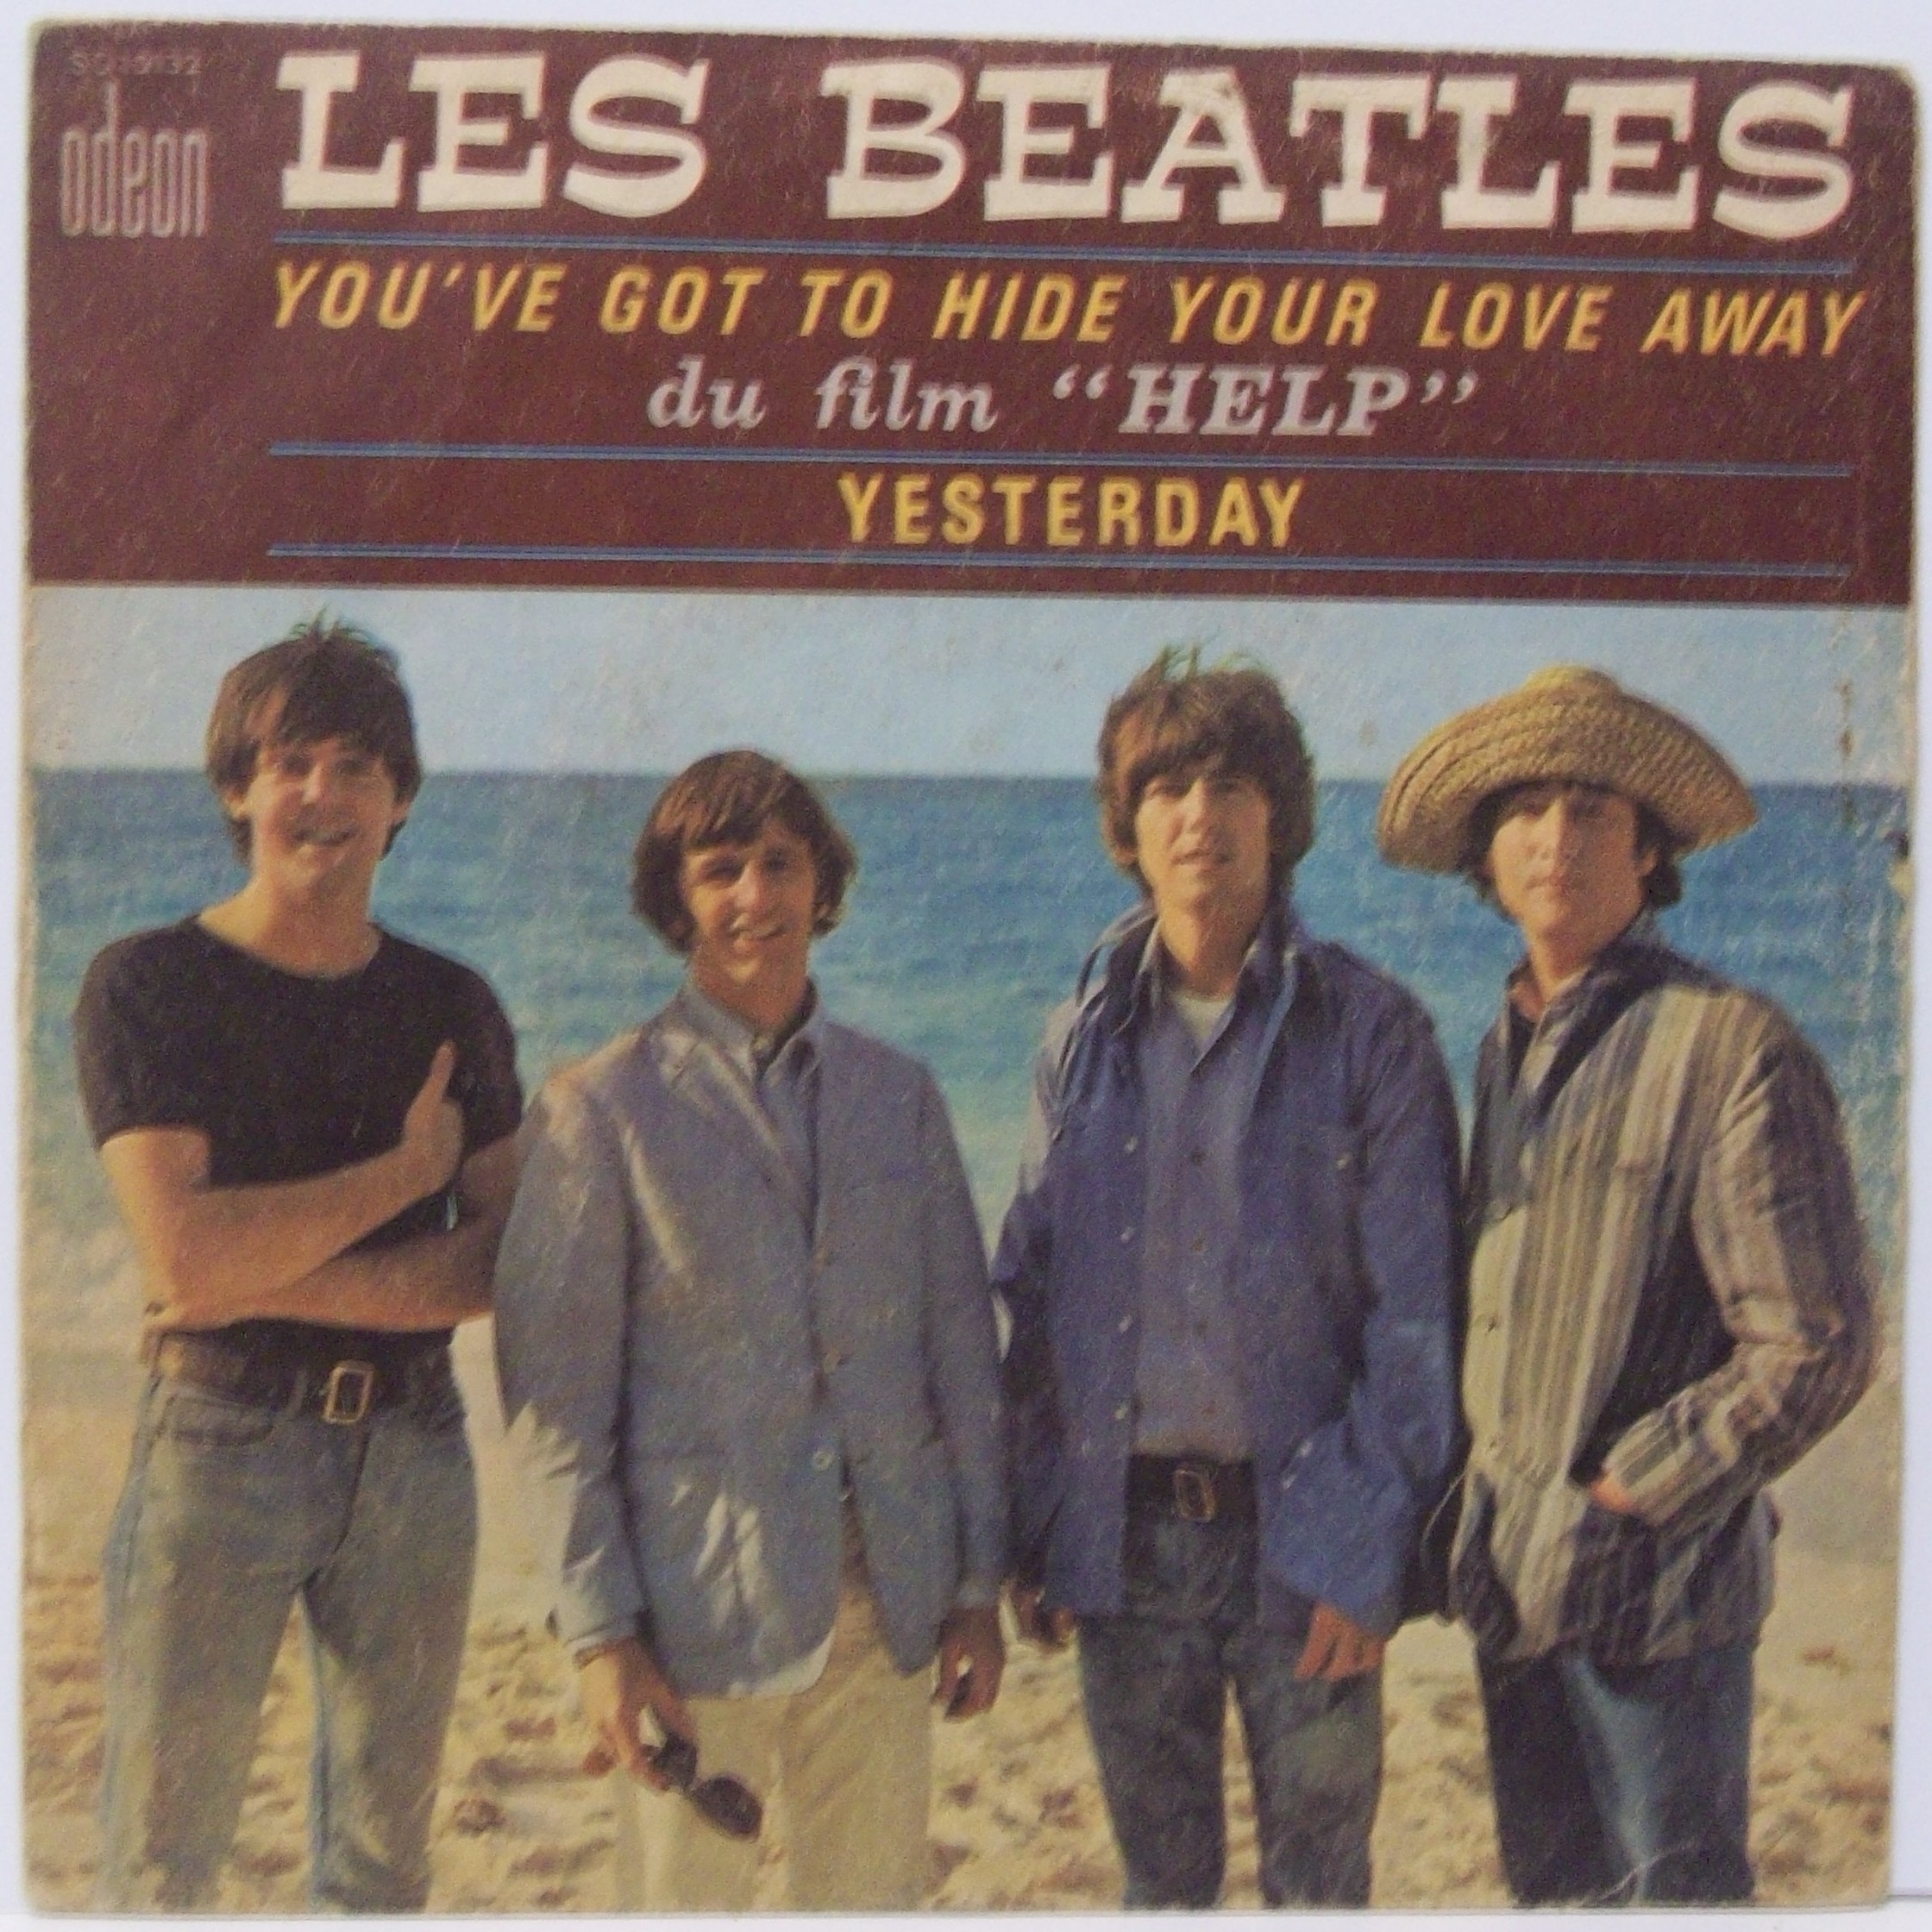 You've Got to Hide Your Love Away The Beatles